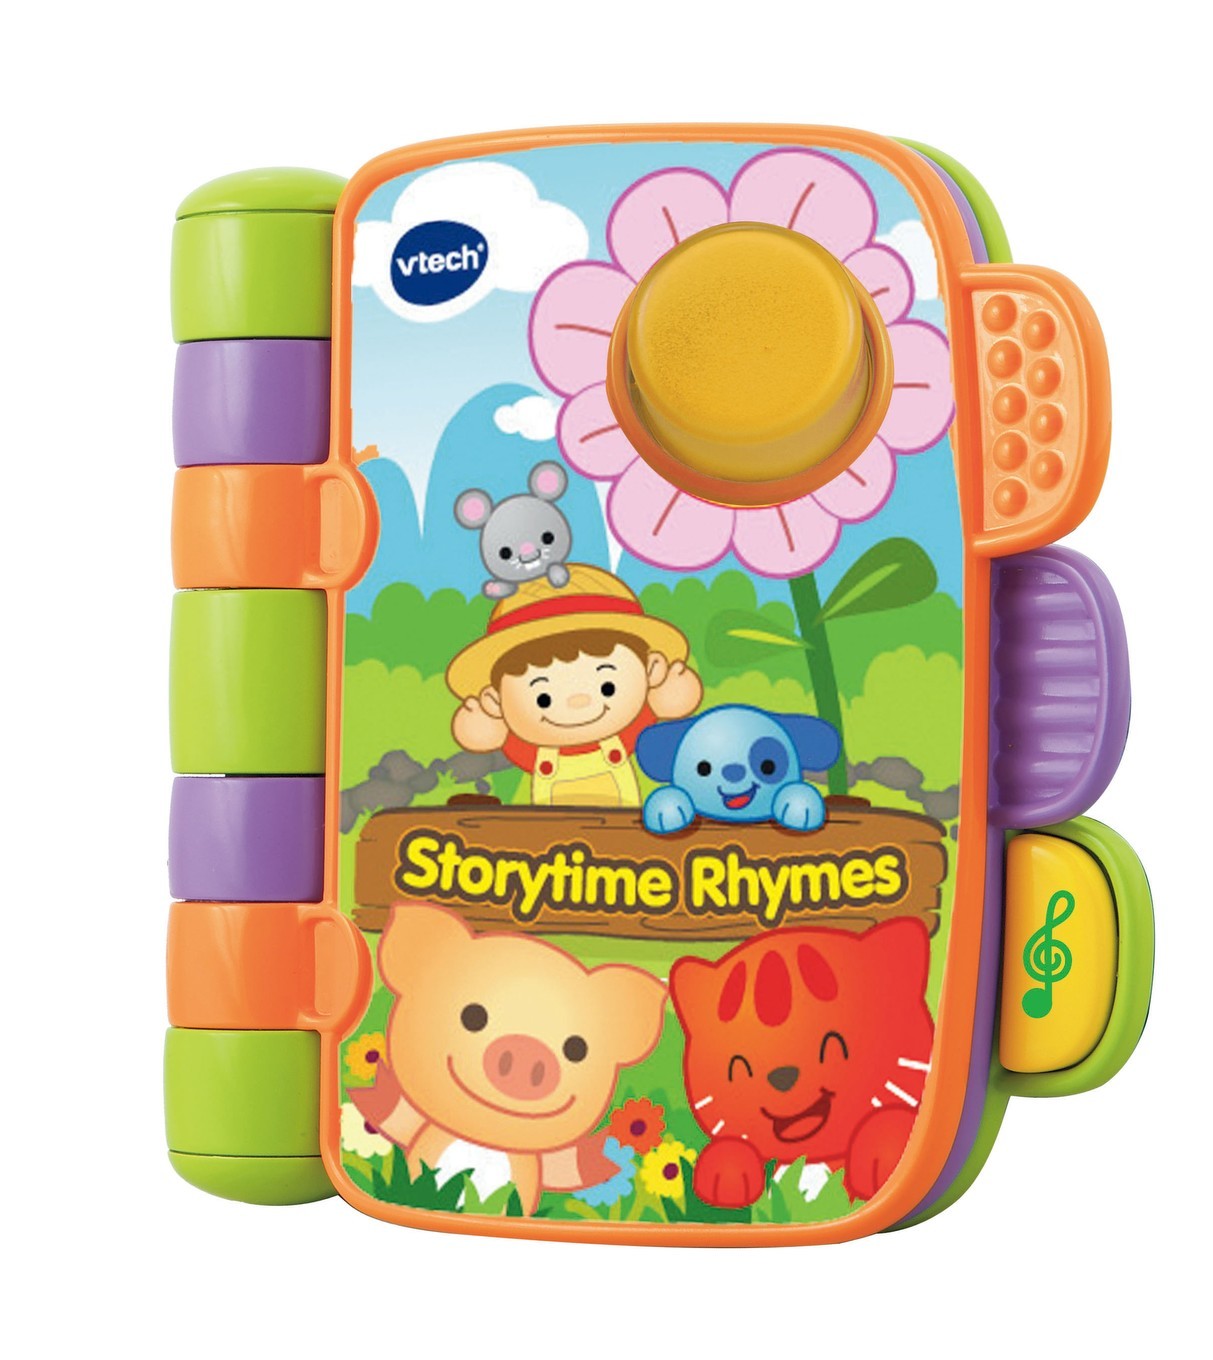 13) Vtech baby's first storytime rhymes 2.jpg